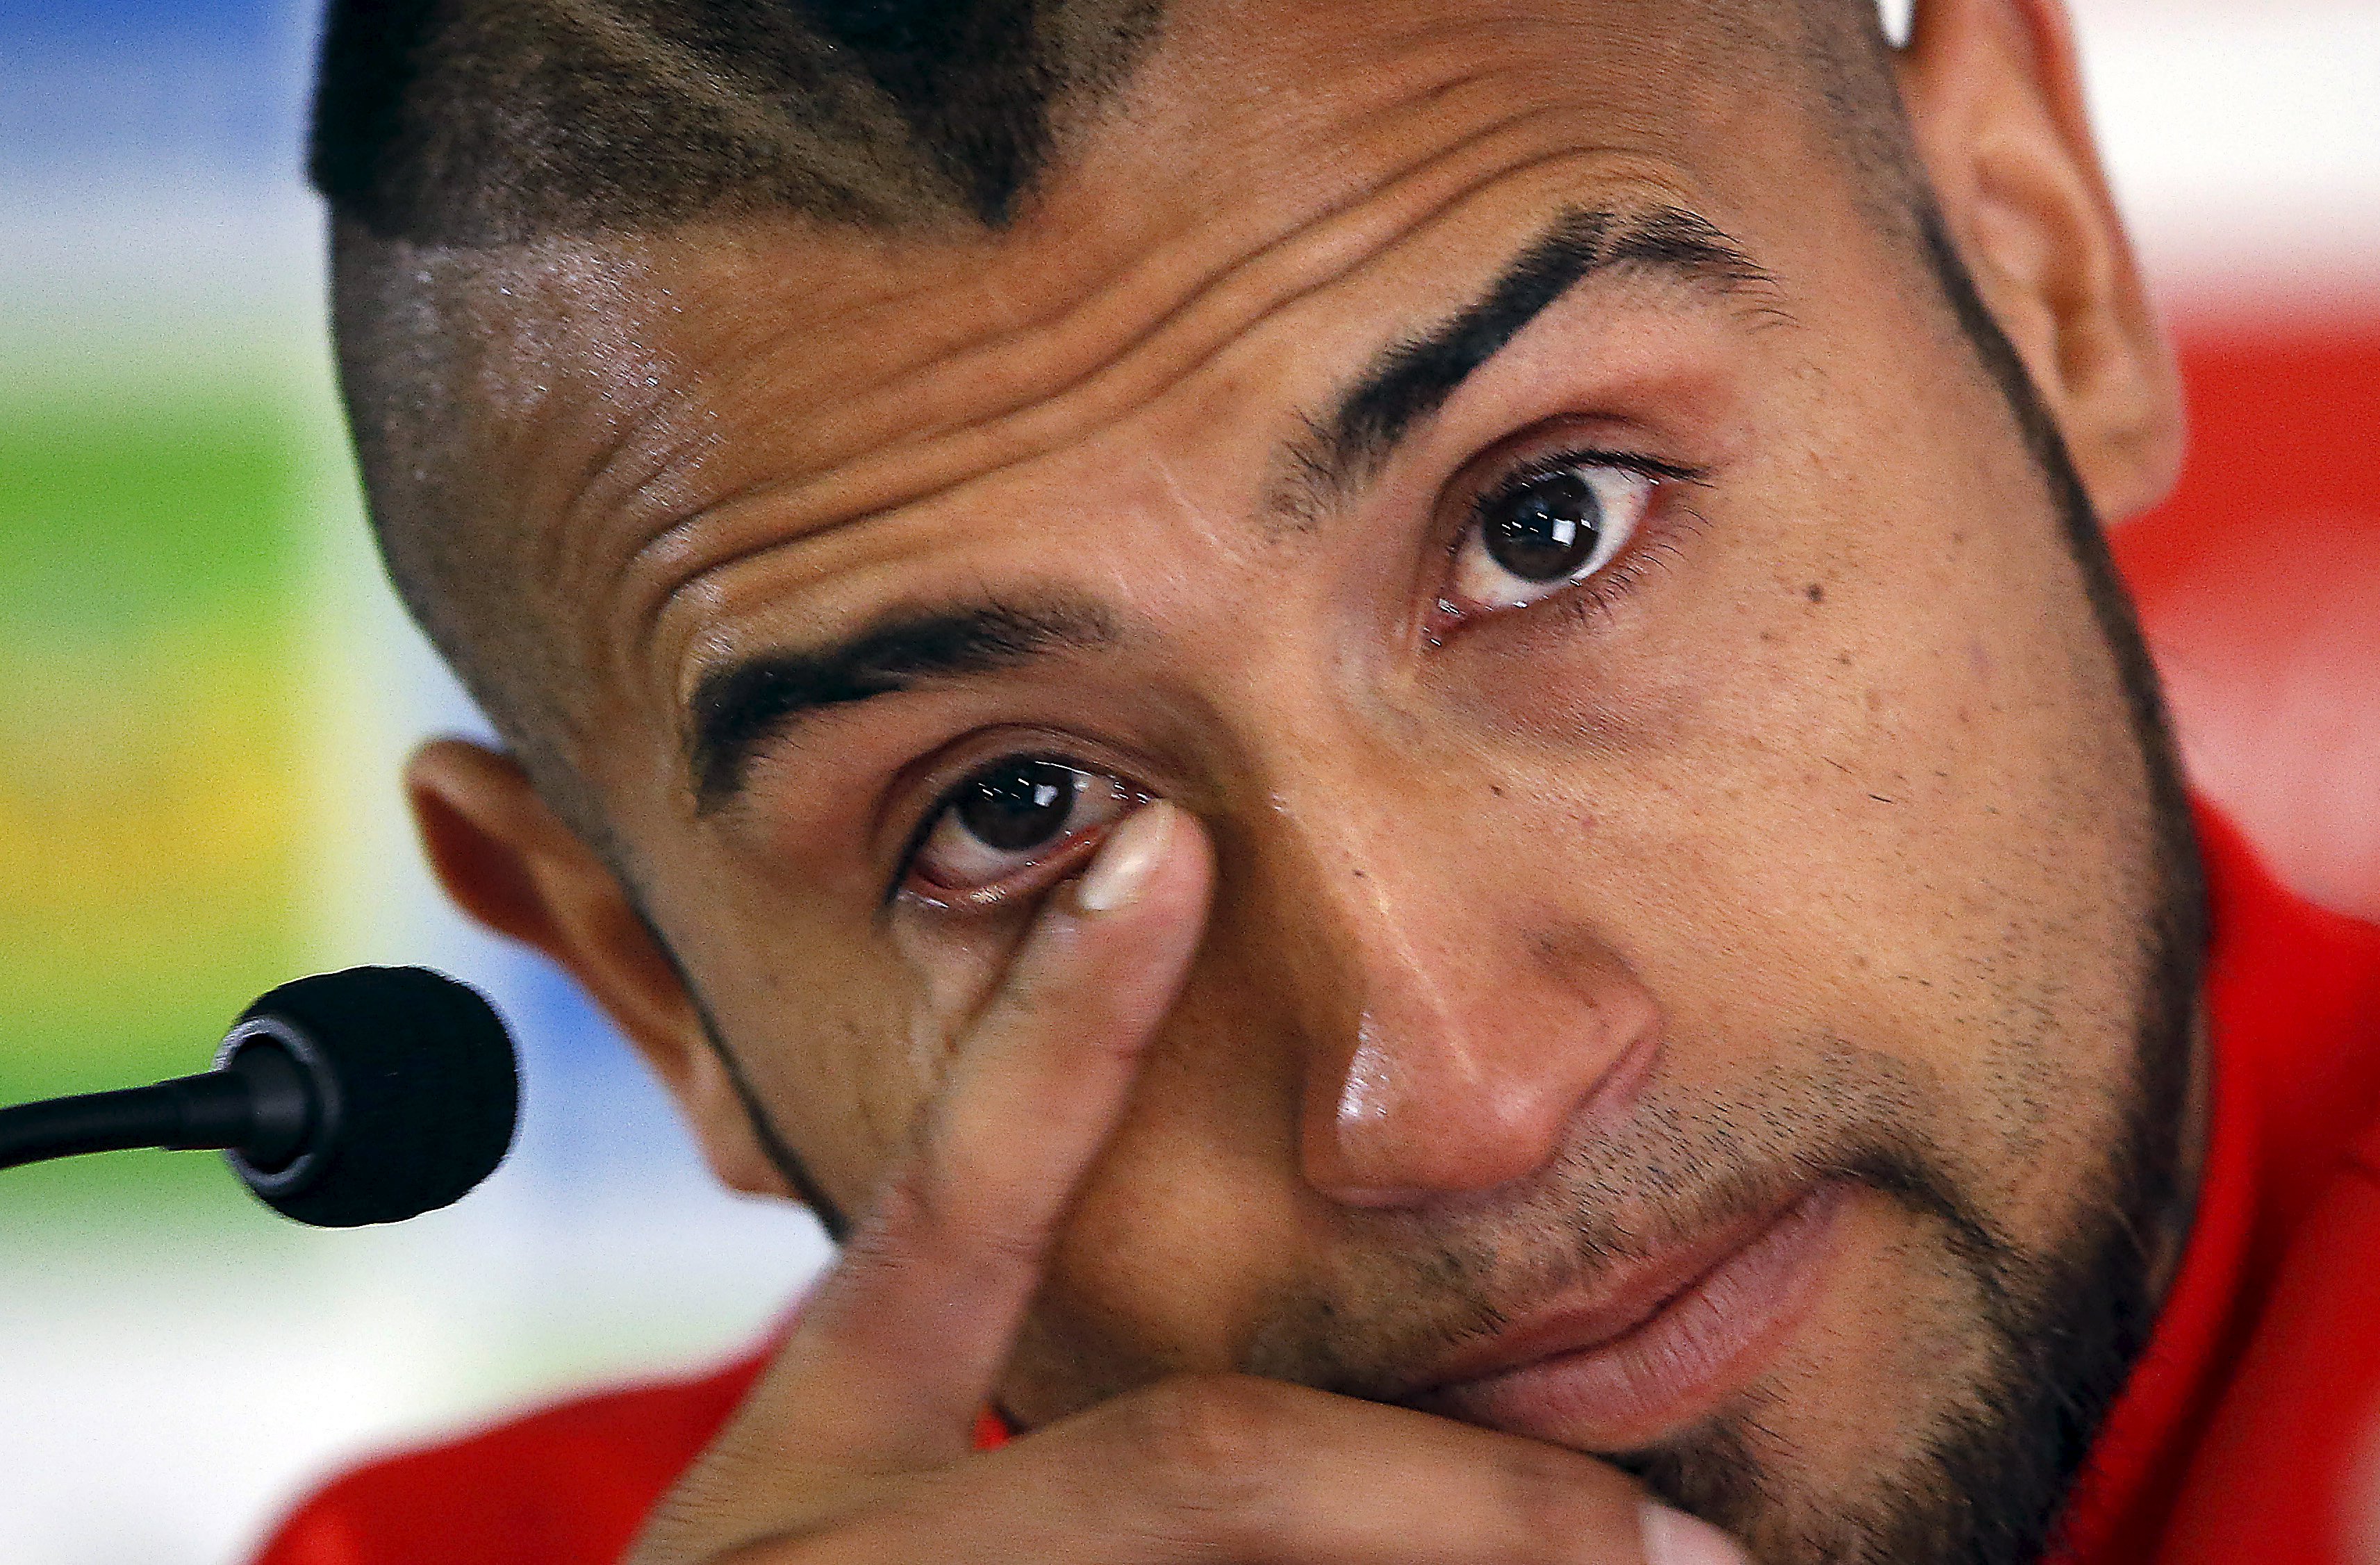 Arturo Vidal's demeanour was in stark contrast to YouTube video of him berating police. Photo: Reuters